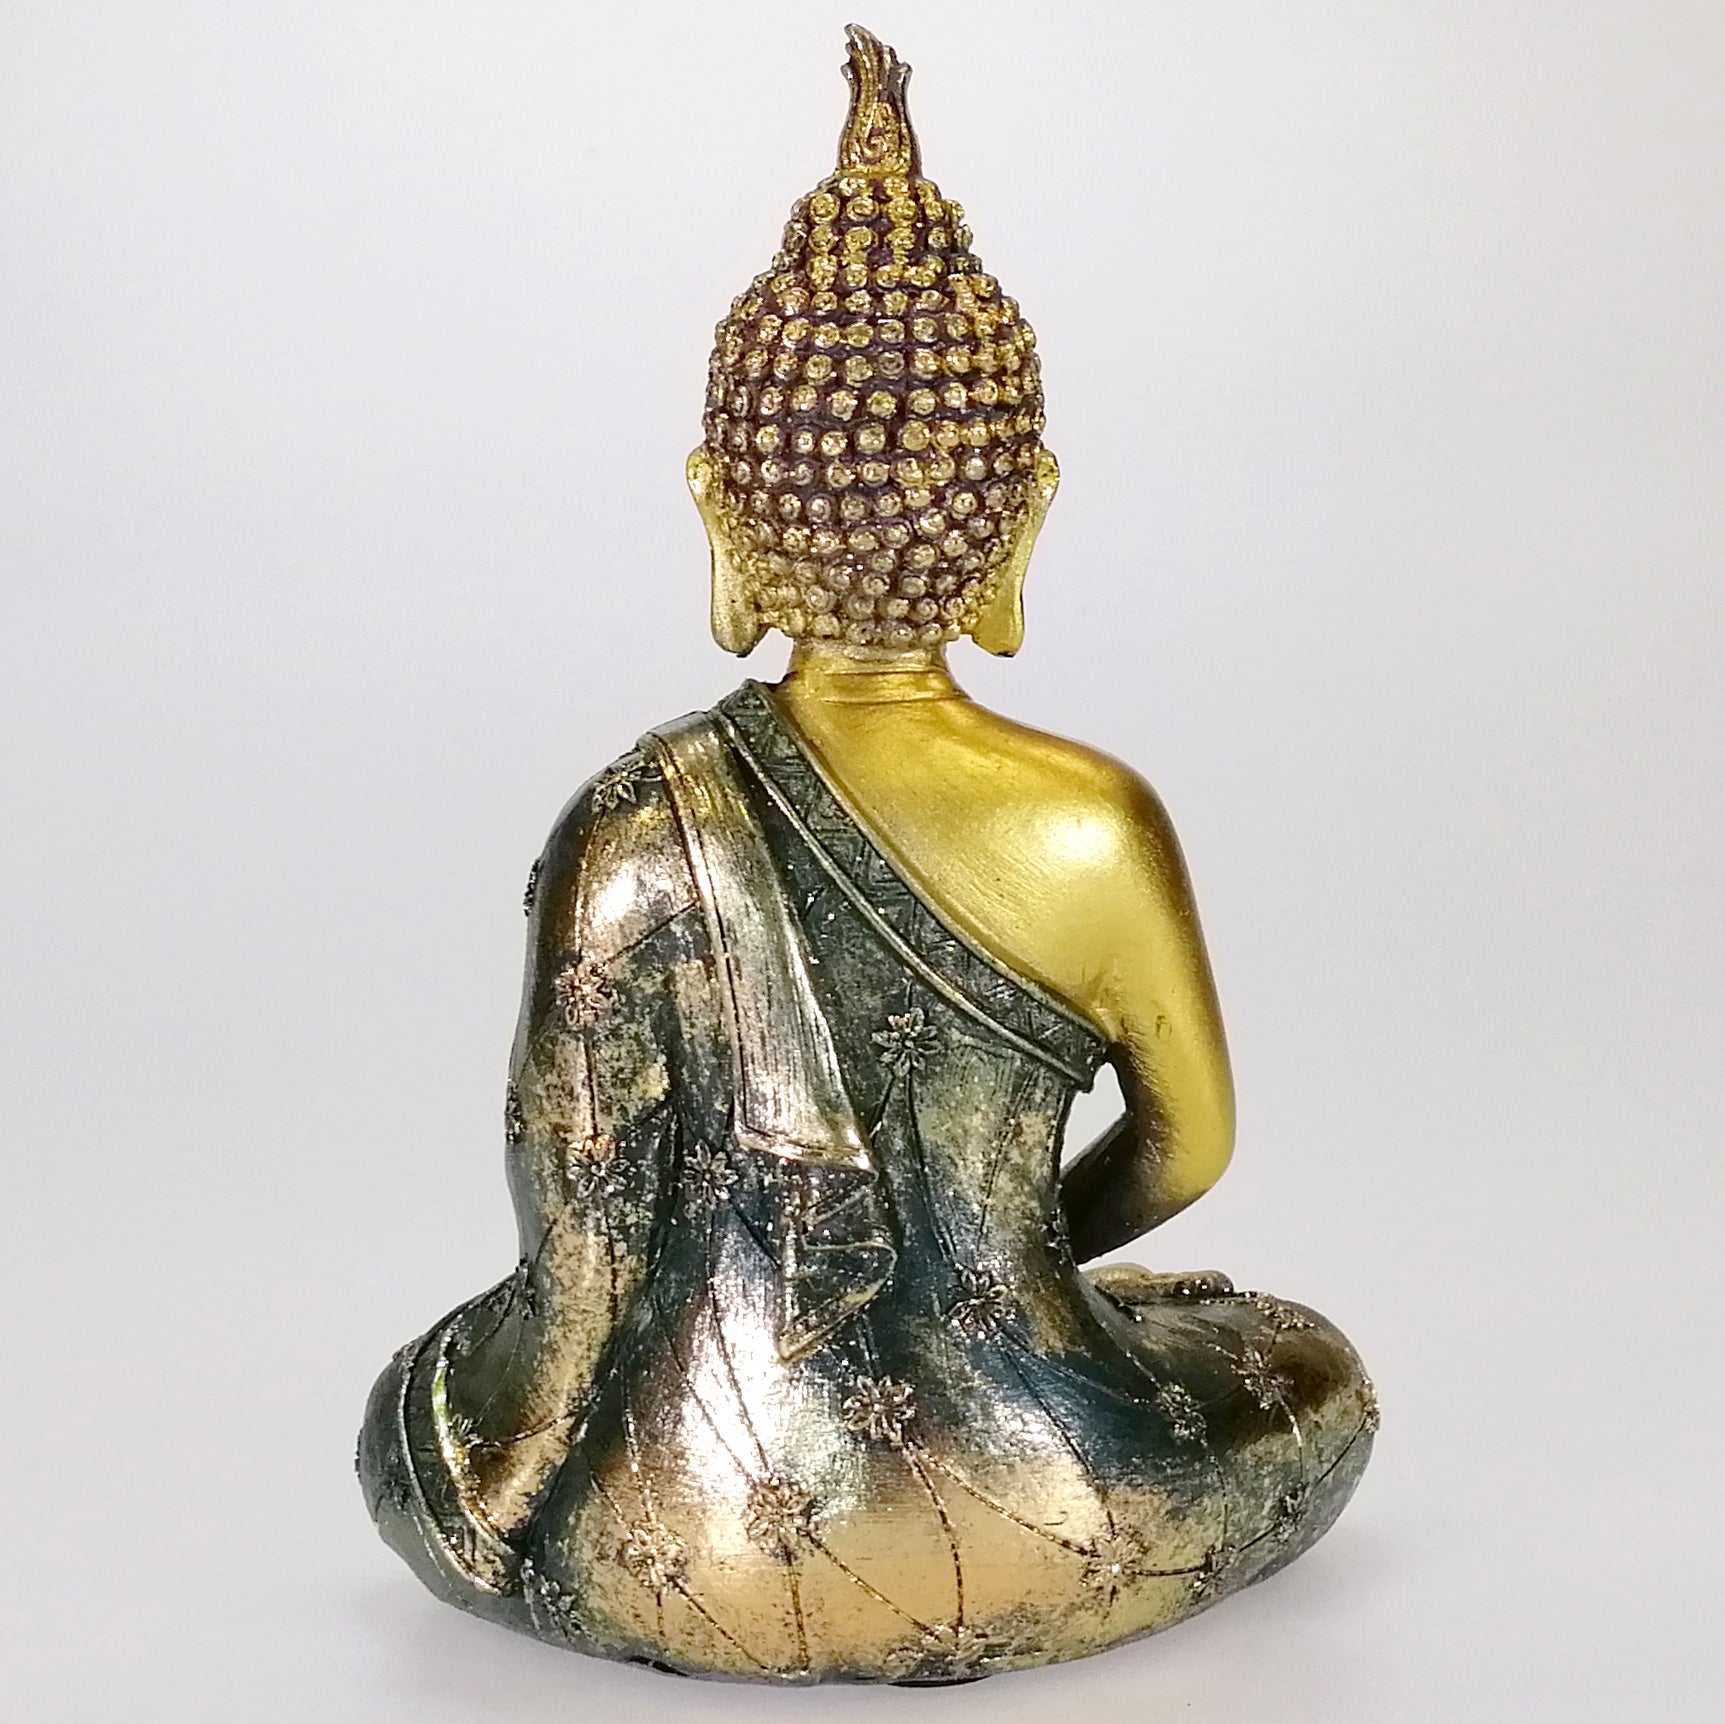 Buddha Figure - Painted Green and Gold - 18cm